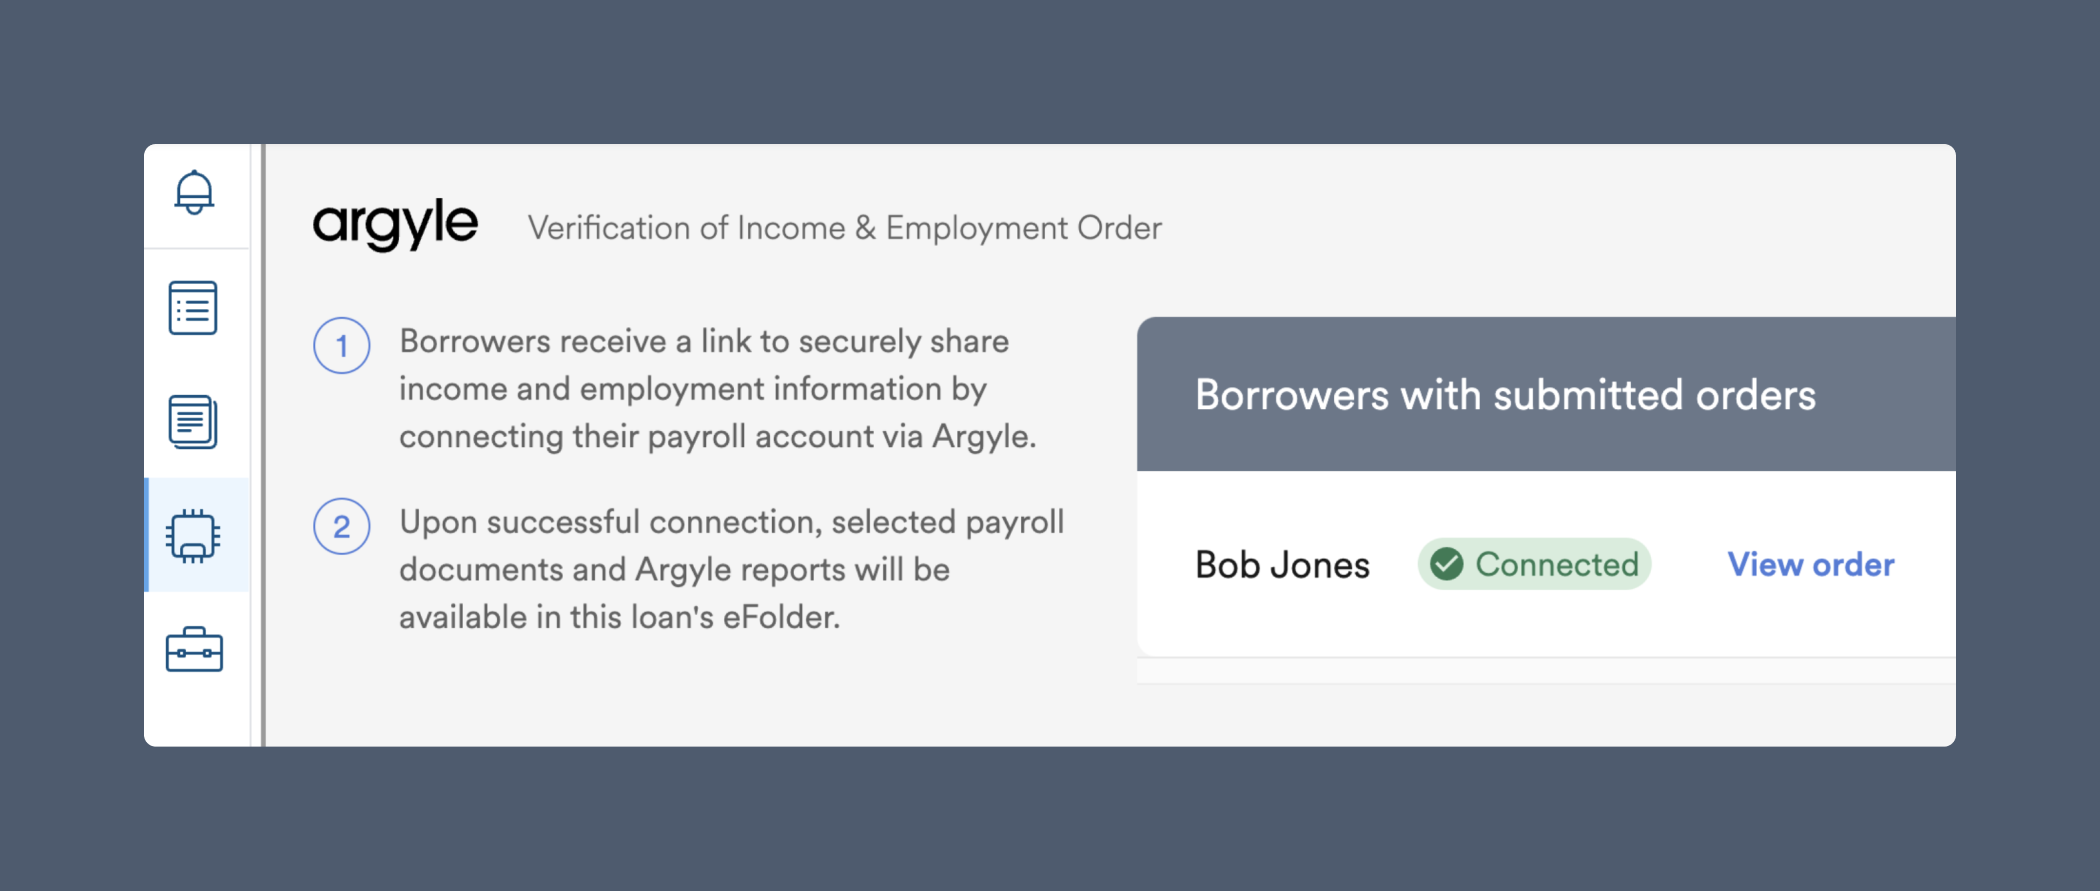 Once a borrower connects their payroll account, you can view their payroll documents and ordered verification reports.